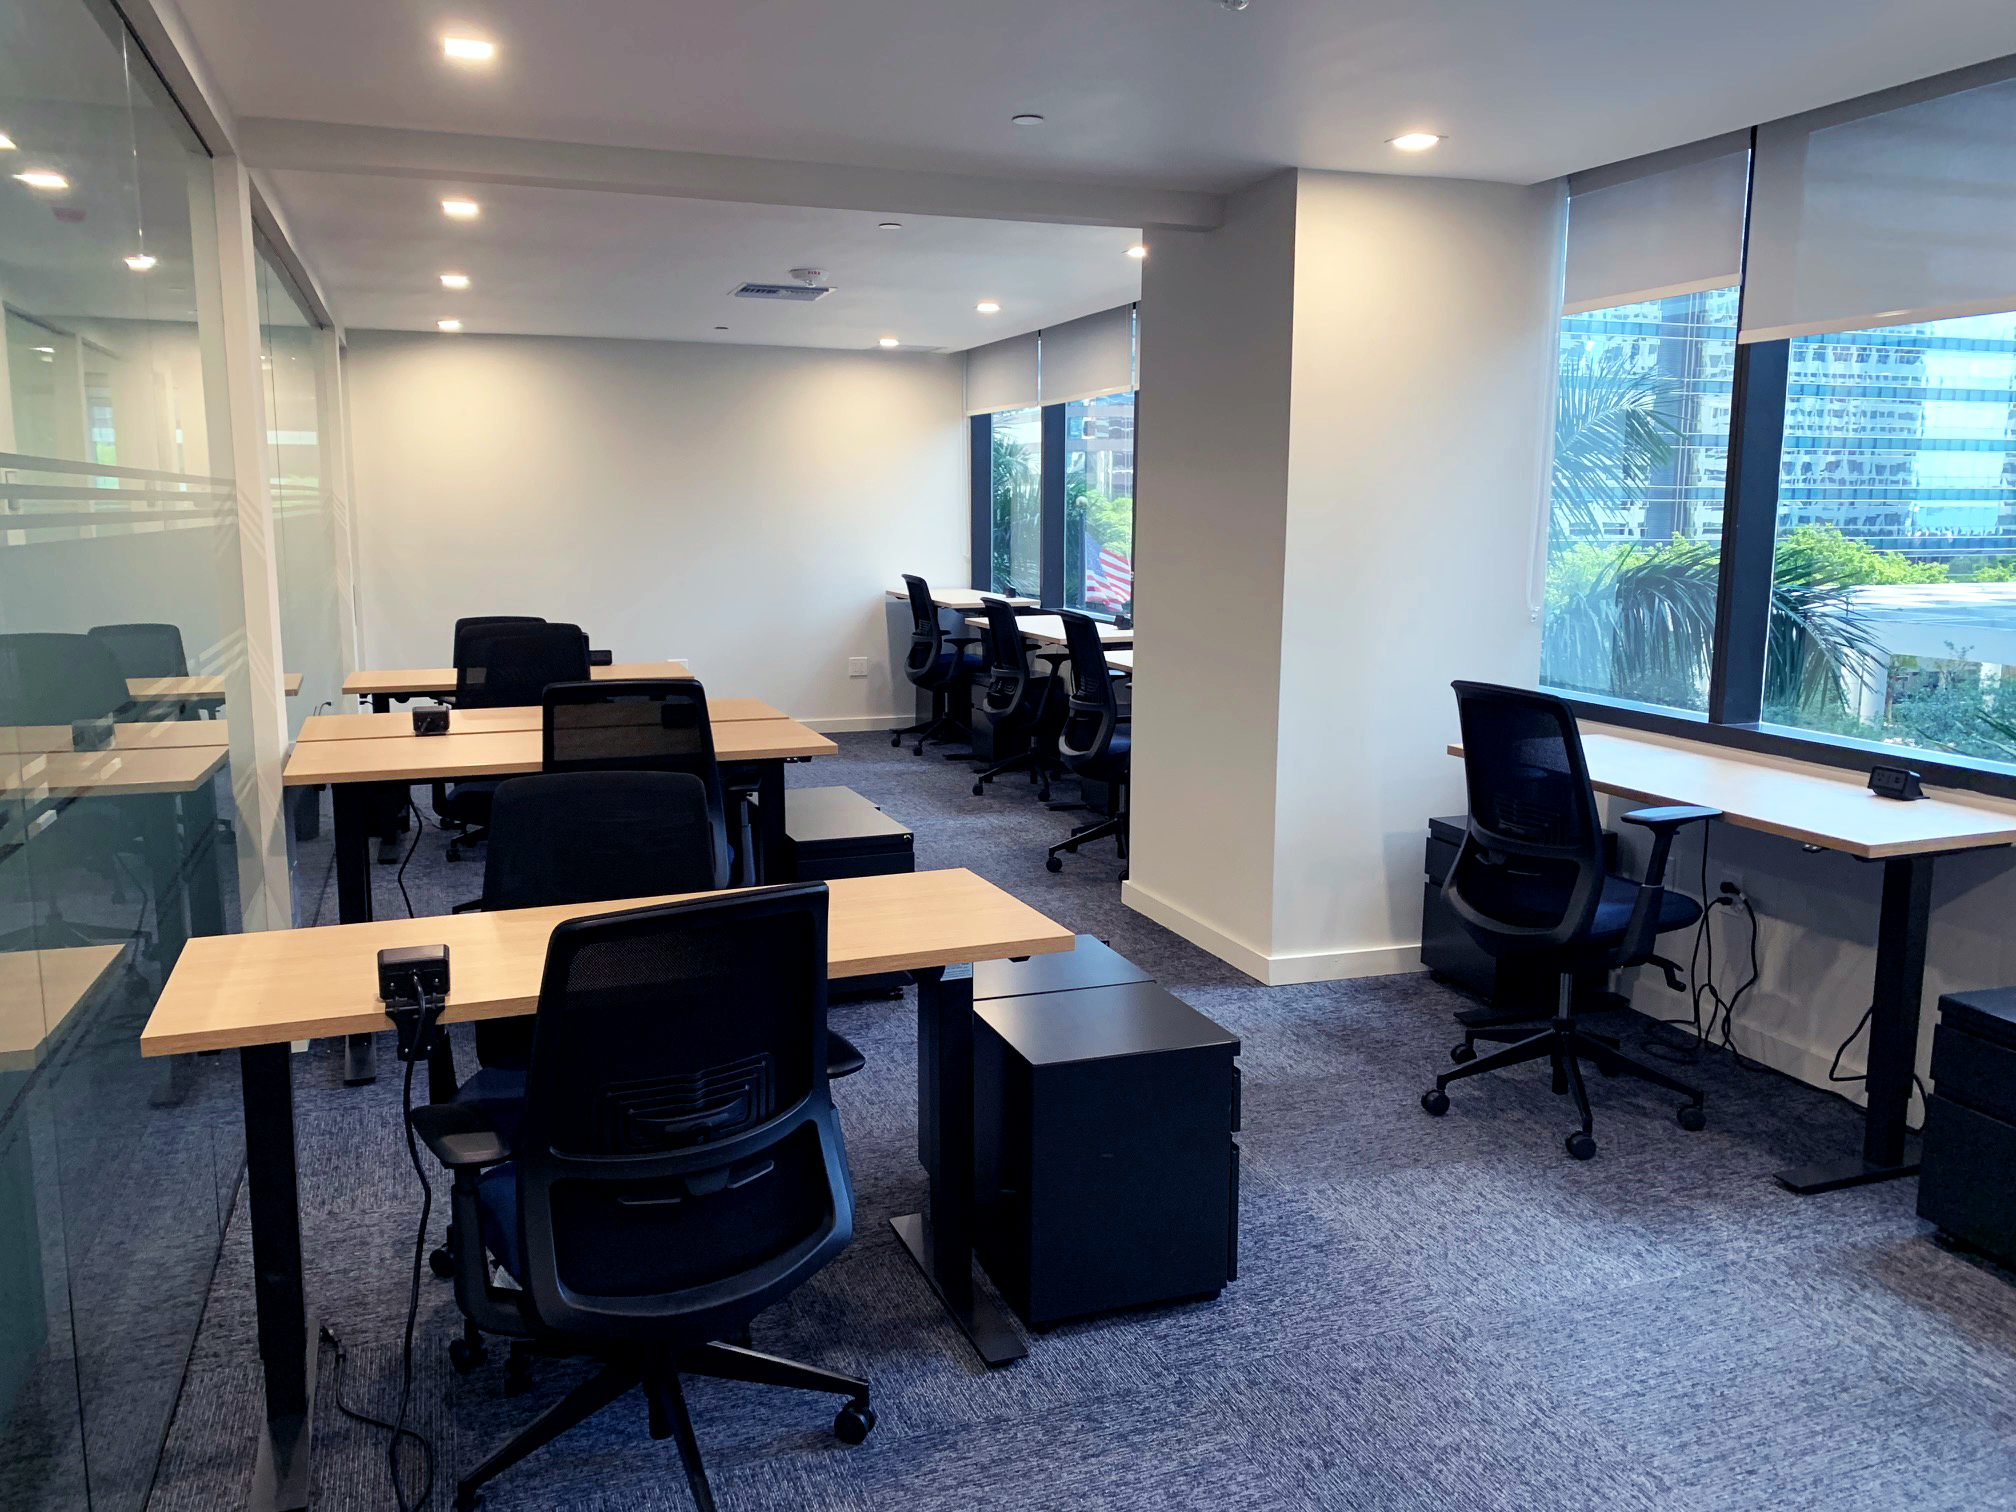 Executive office for large teams in coworking space, CoSuite, in Brickell Miami